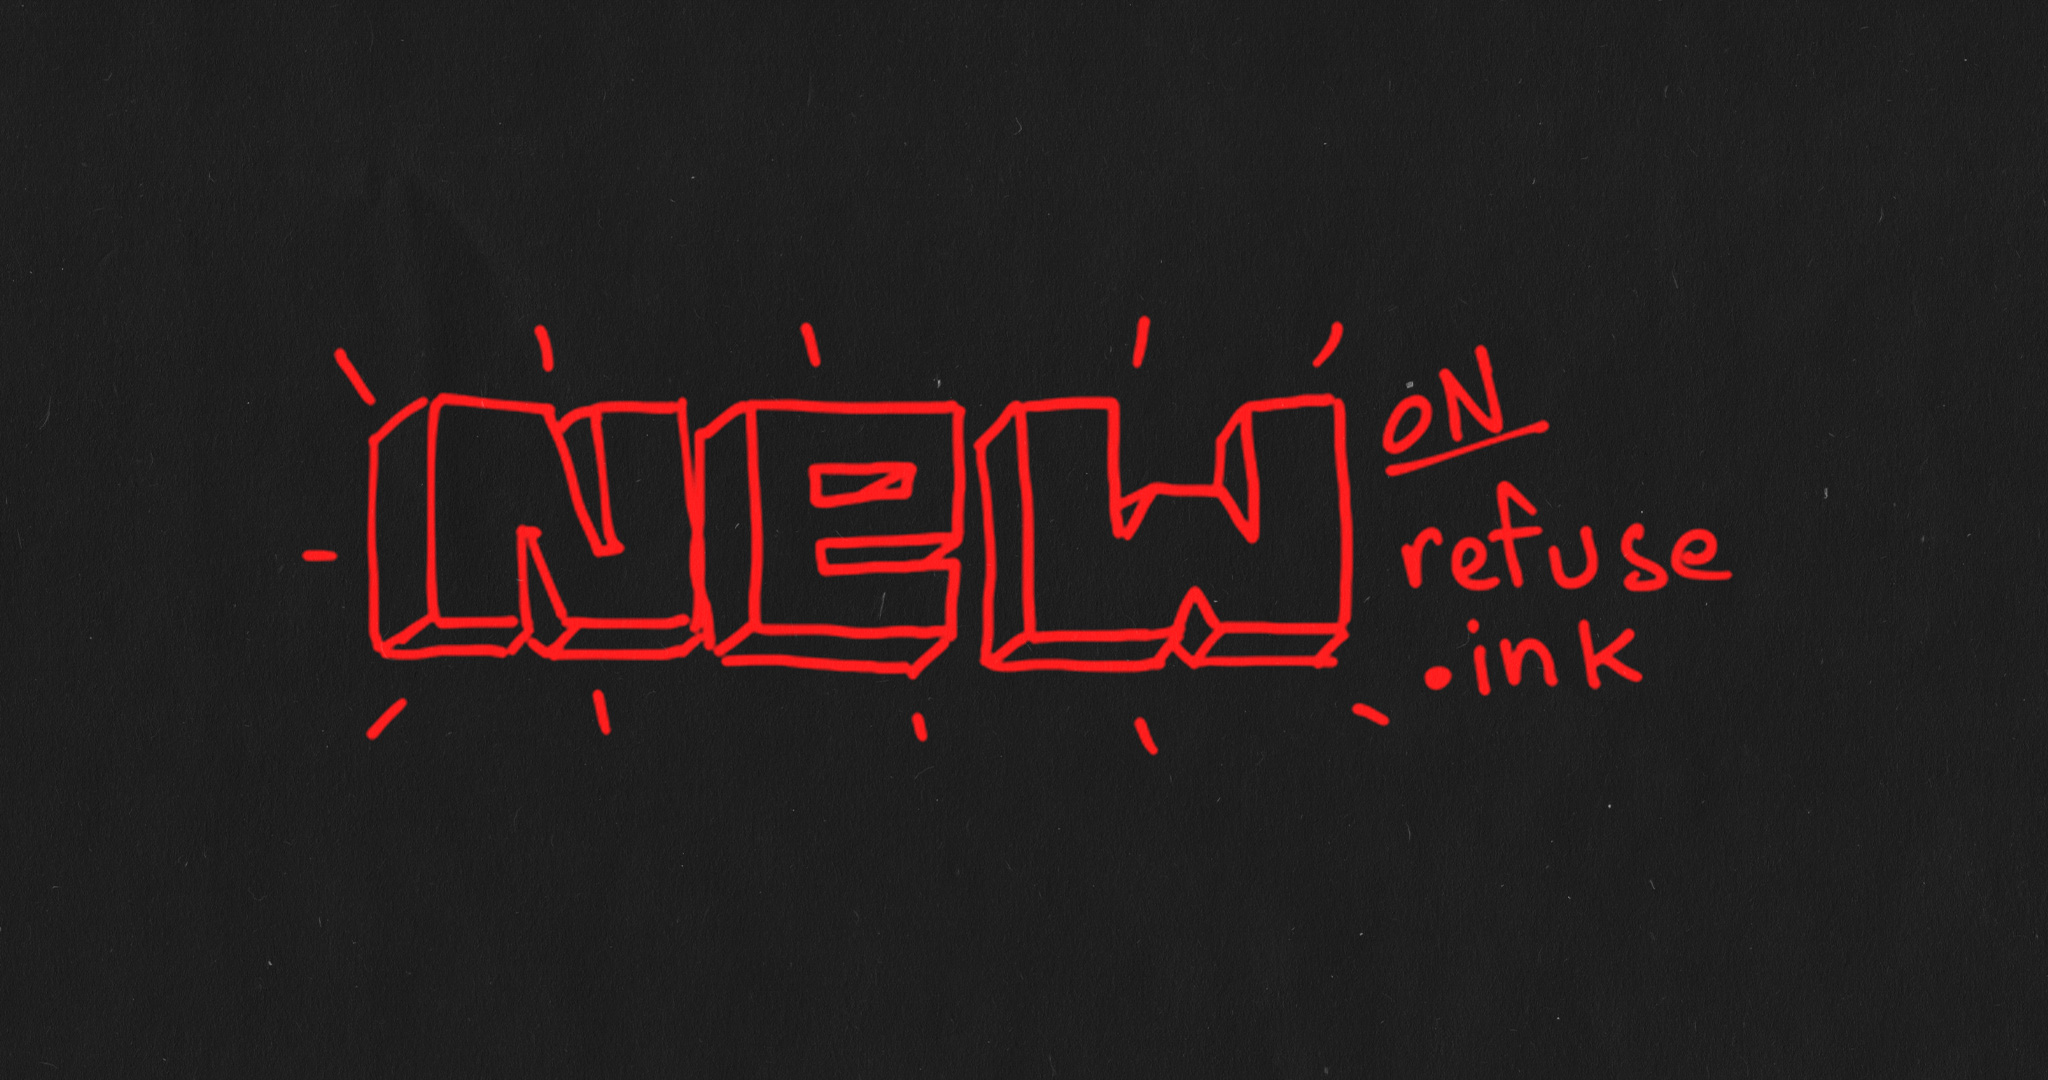 Doodle-style hand-drawn typography reading: New on refuse.ink.